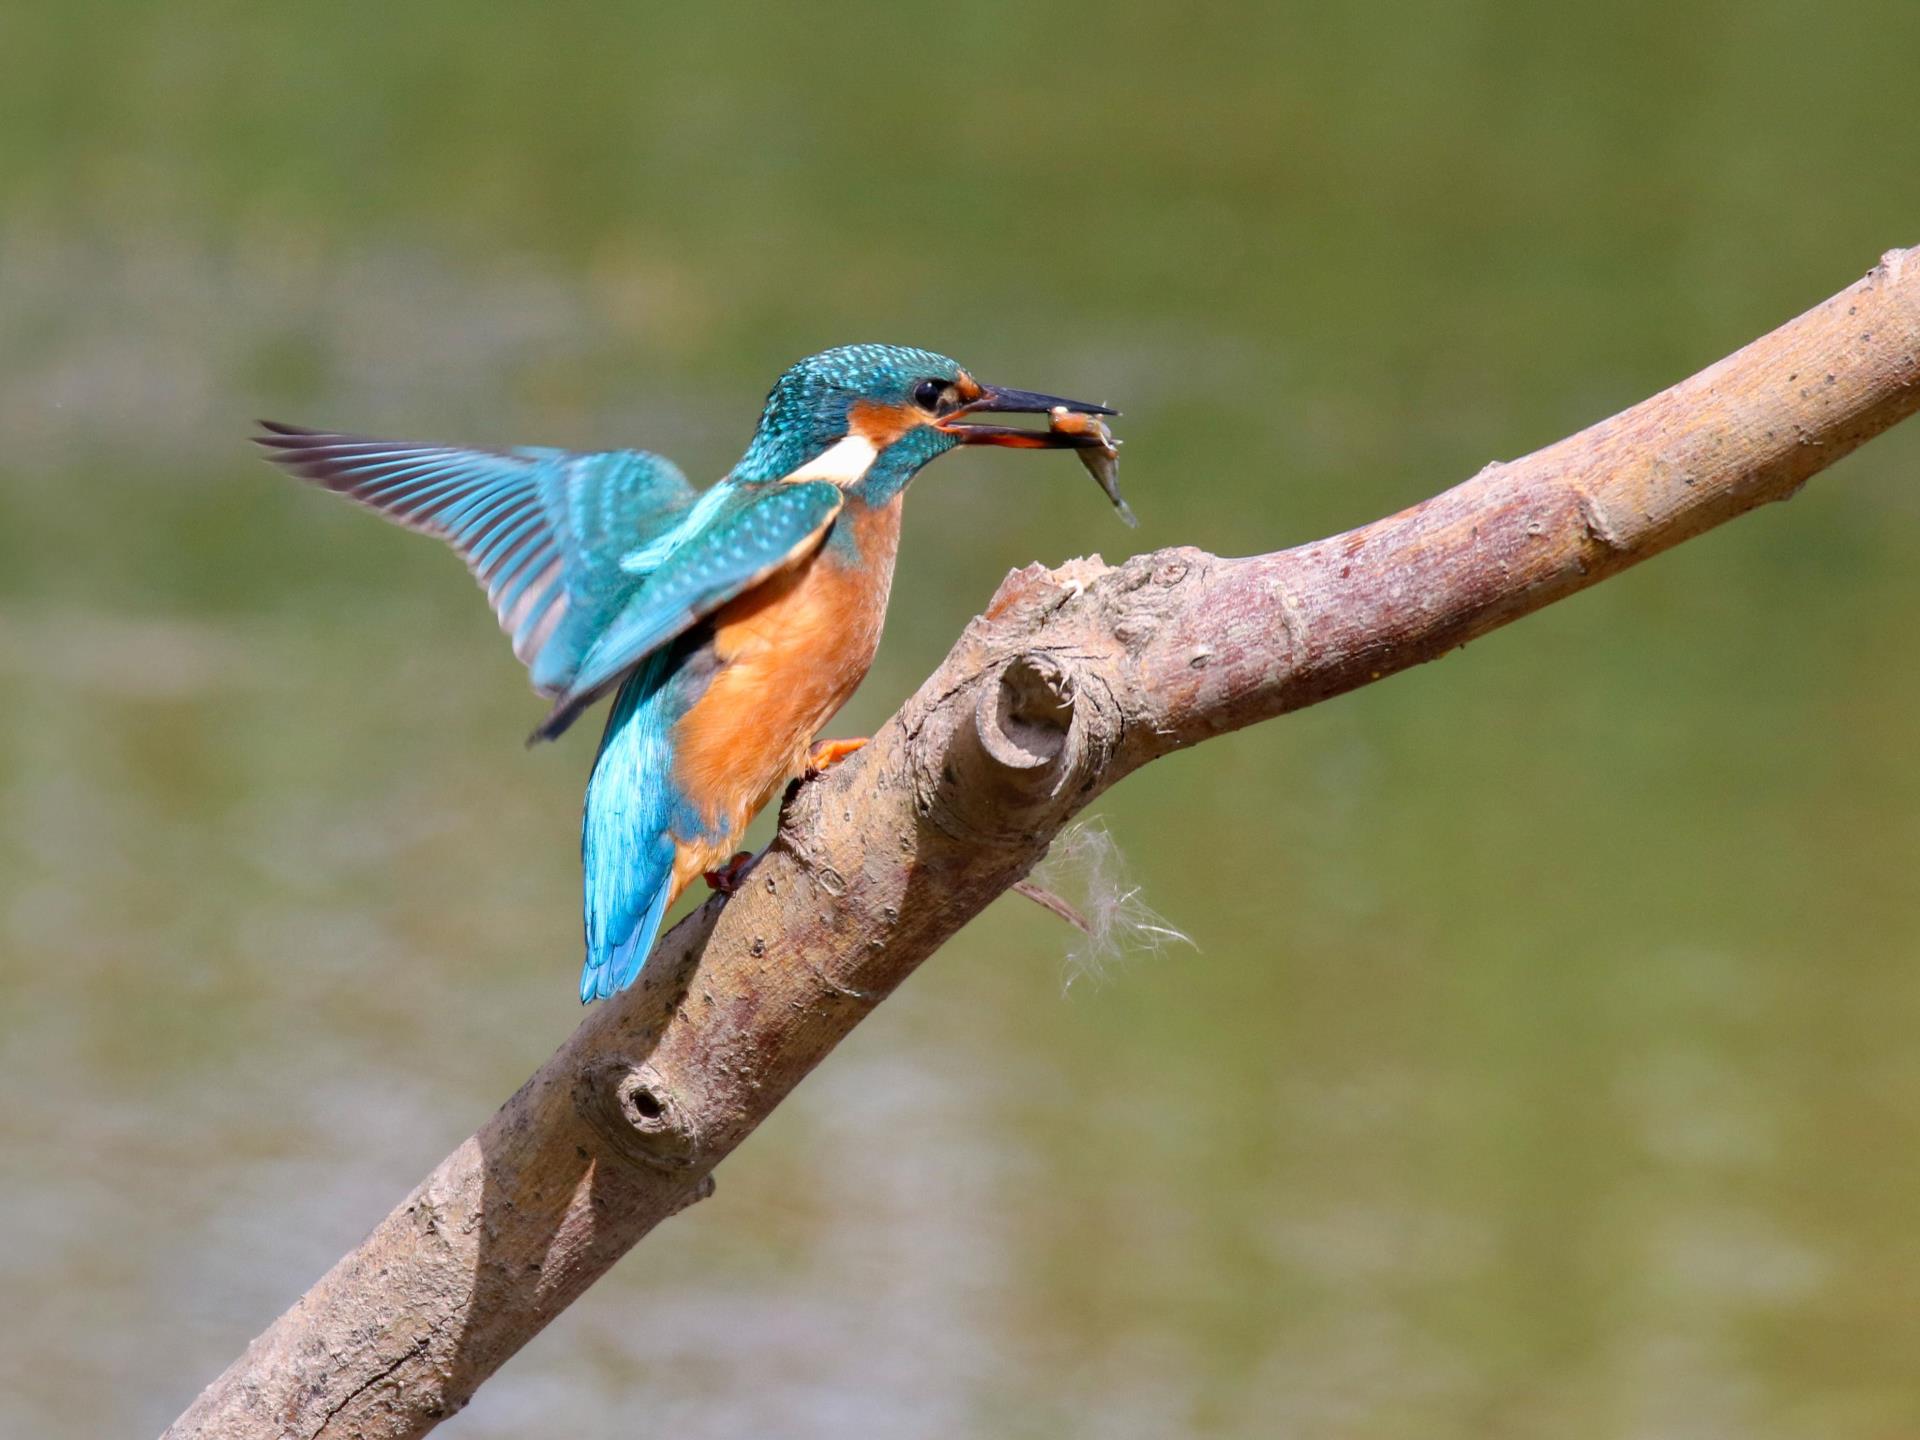 Kingfishers are a regular sight through the year